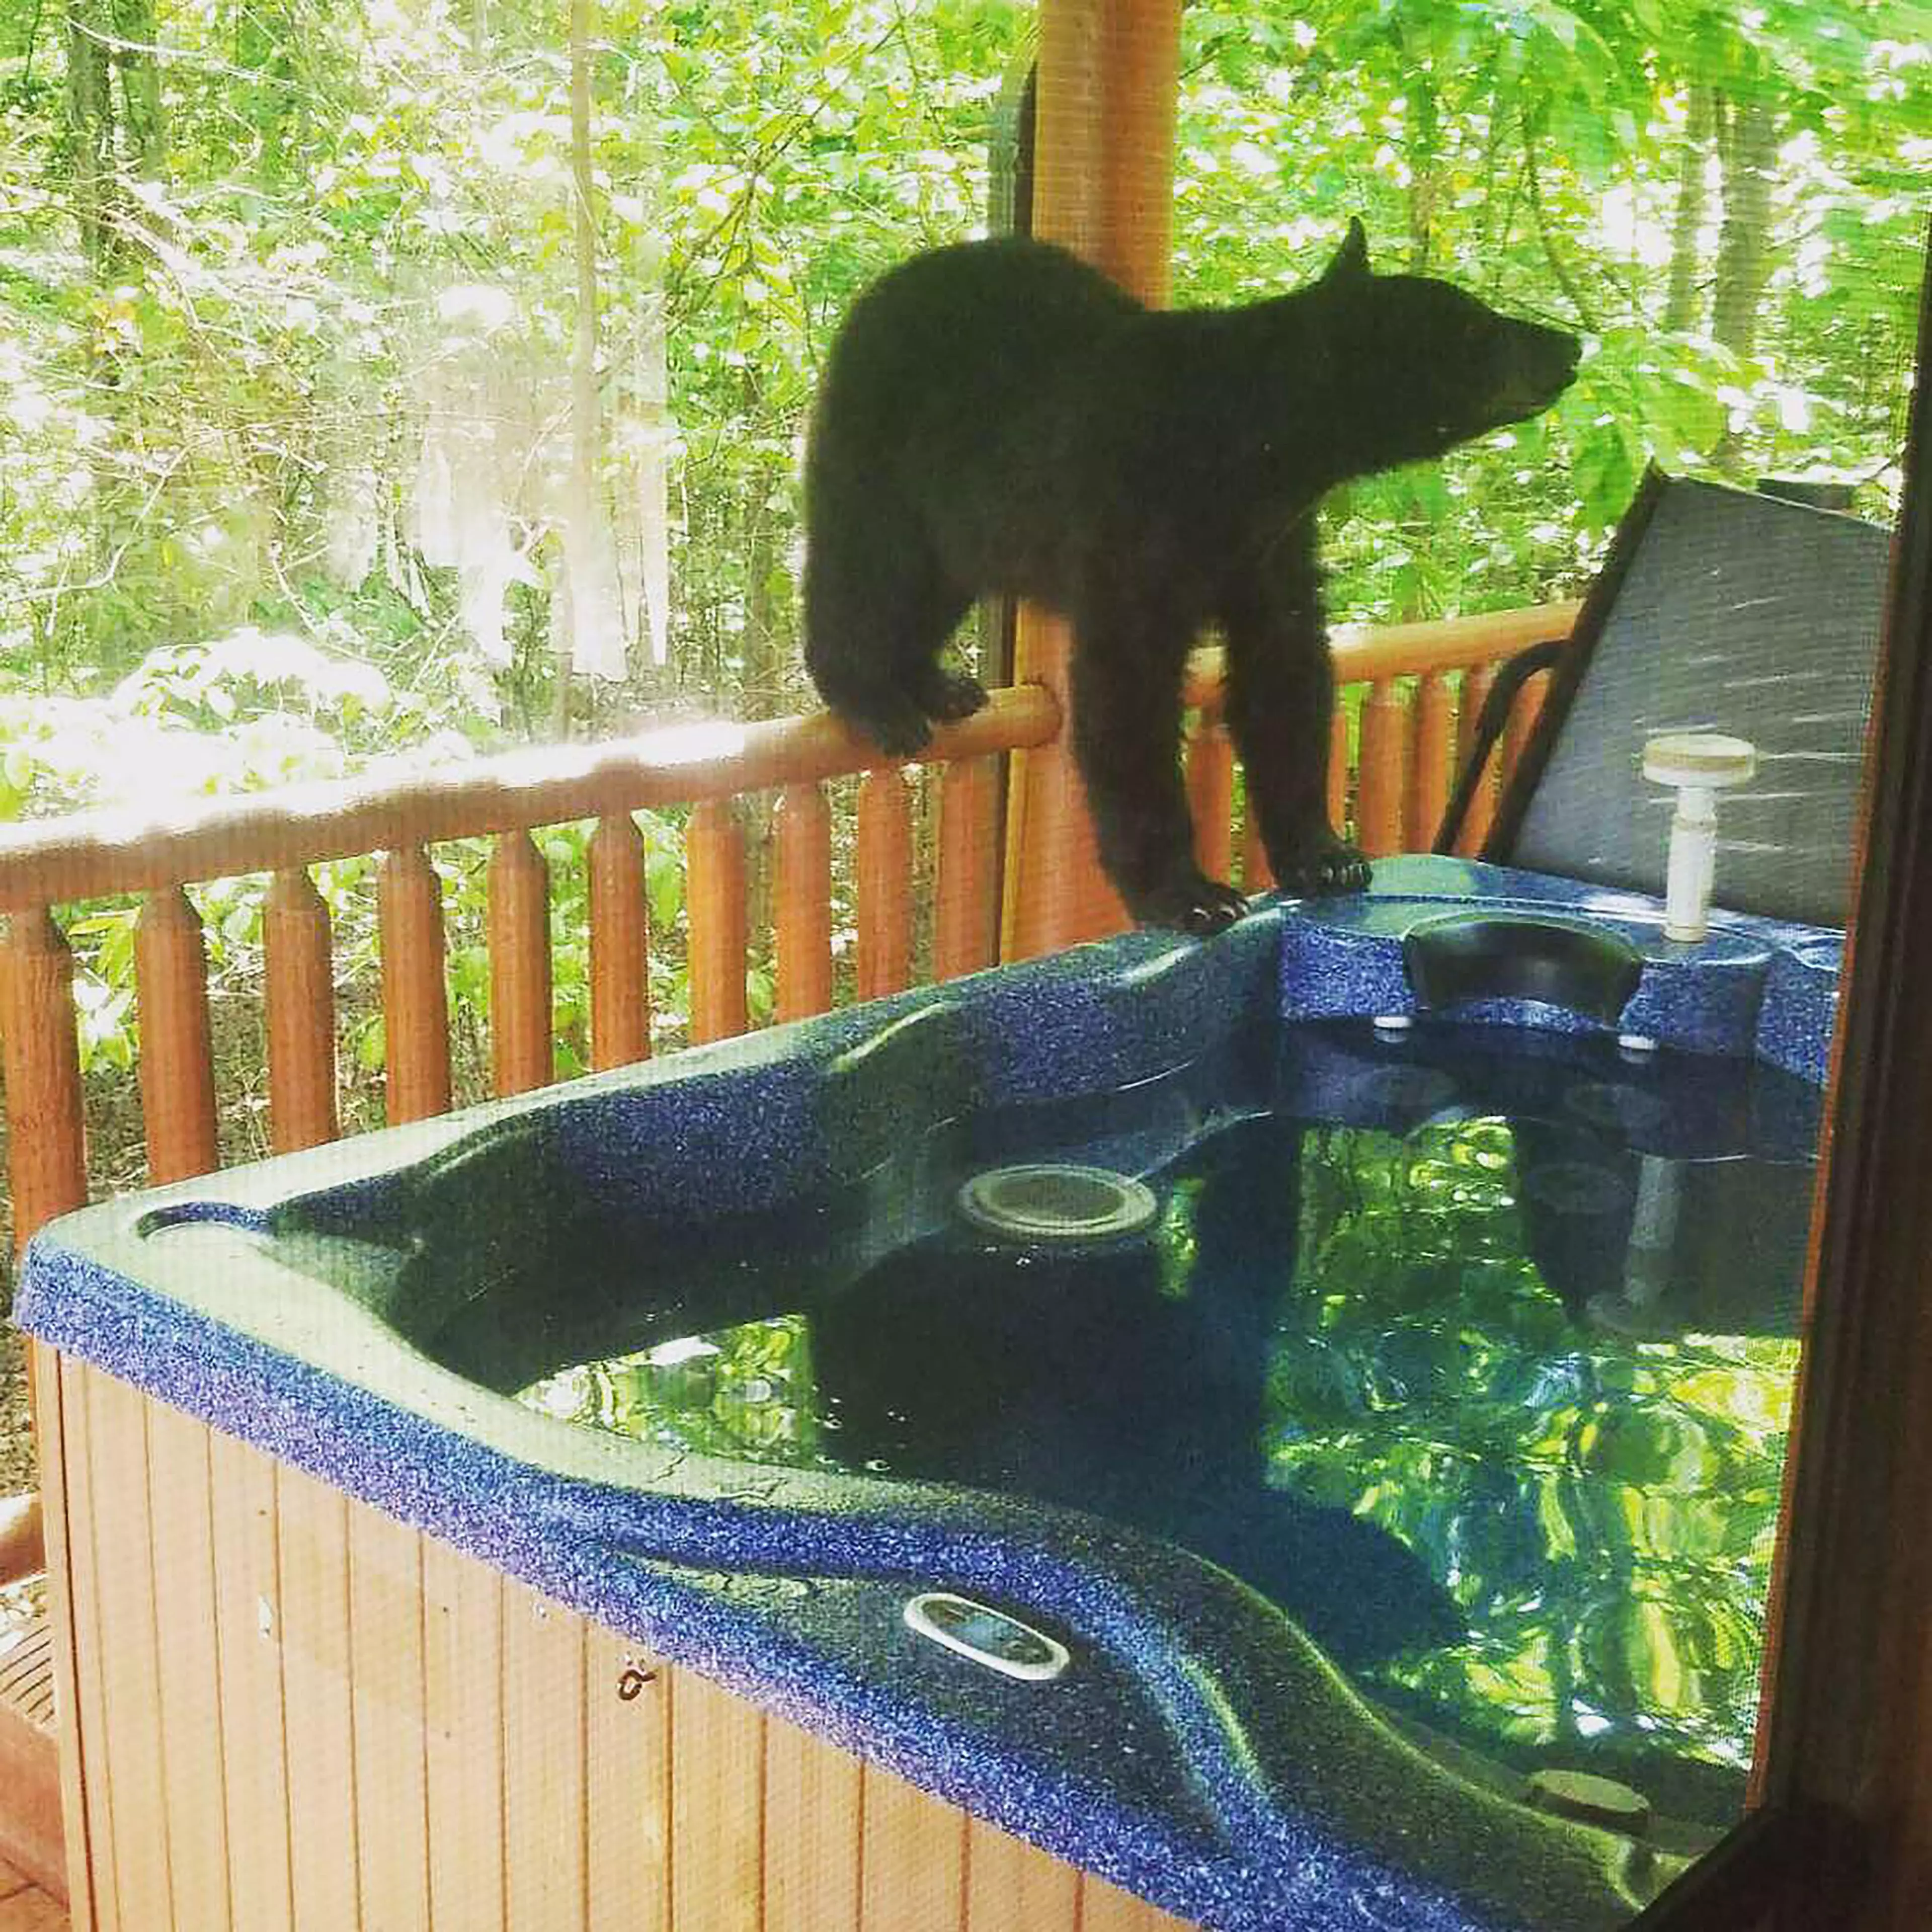 The cute bear cubs enjoyed playing about in the hot tub.